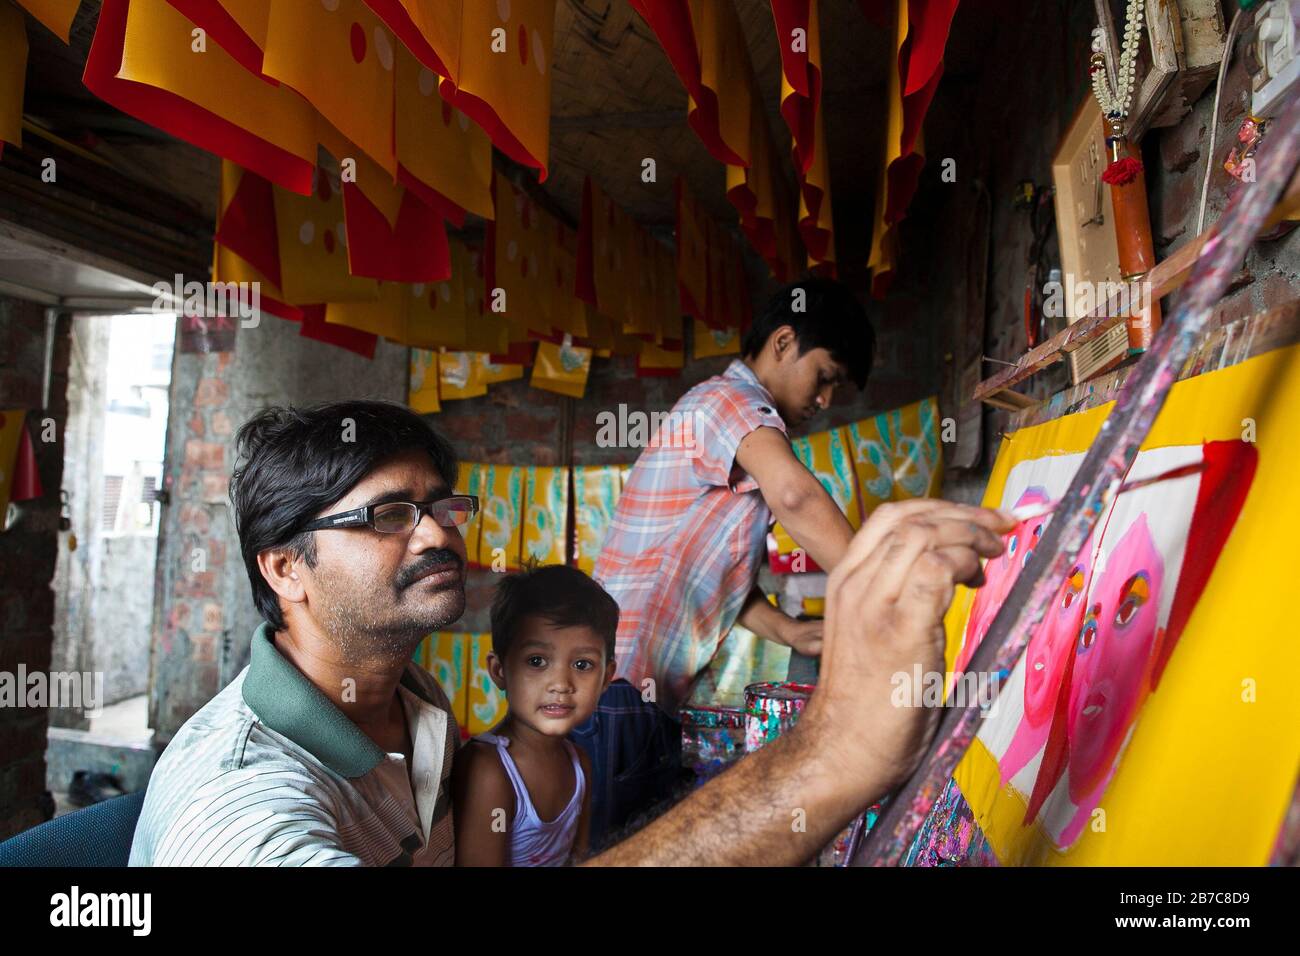 Proshanto Kumar Das, son of Raj Kumar Das, best known as RK Das, one of the first generation rickshaw artists in Bangladesh, is engaged in painting a rickshaw art while his on Joy helps him at his studio in capital Dhaka, on May 3, 2012. The rickshaw art is a form of pop art that depicts our urban culture and folklore of Bangladesh. Rickshaws were first introduced in Bangladesh in the 1930s from Japan, where the three-wheeled vehicles were known as 'nintaku'. The idea of decorating the leg-powered contraptions took off in Bangladesh the 1950s with the tradition following the simple yet colourf Stock Photo